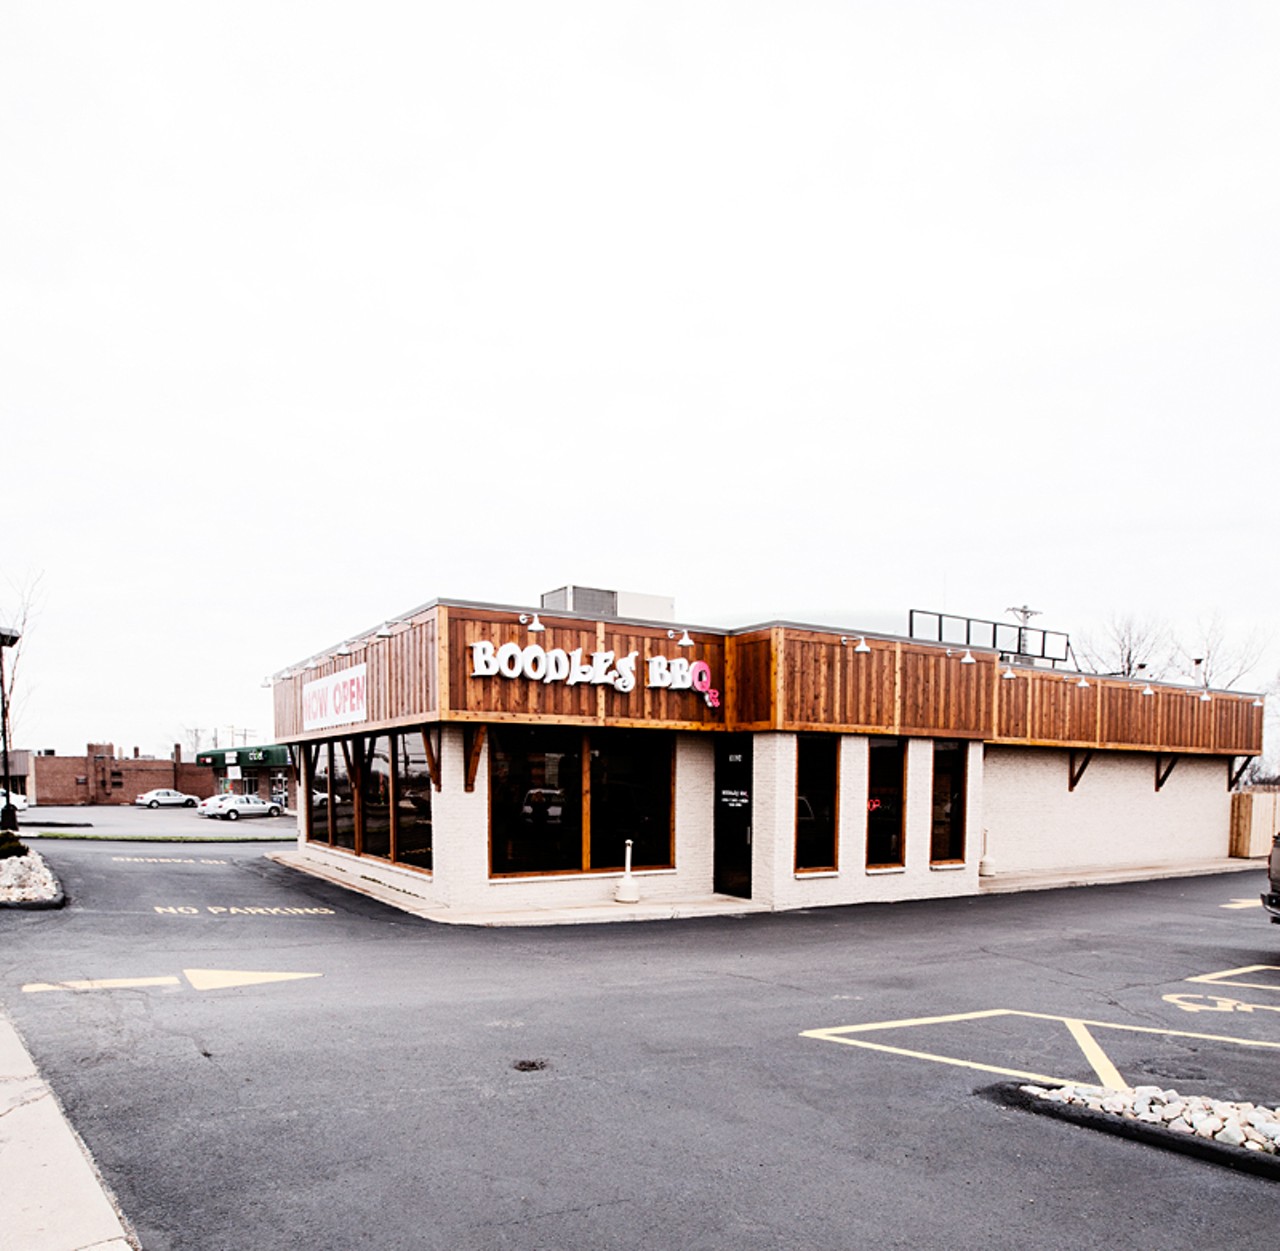 Boodles on Gravois, founded by Jonathan Seitz (founder of Bandana's).